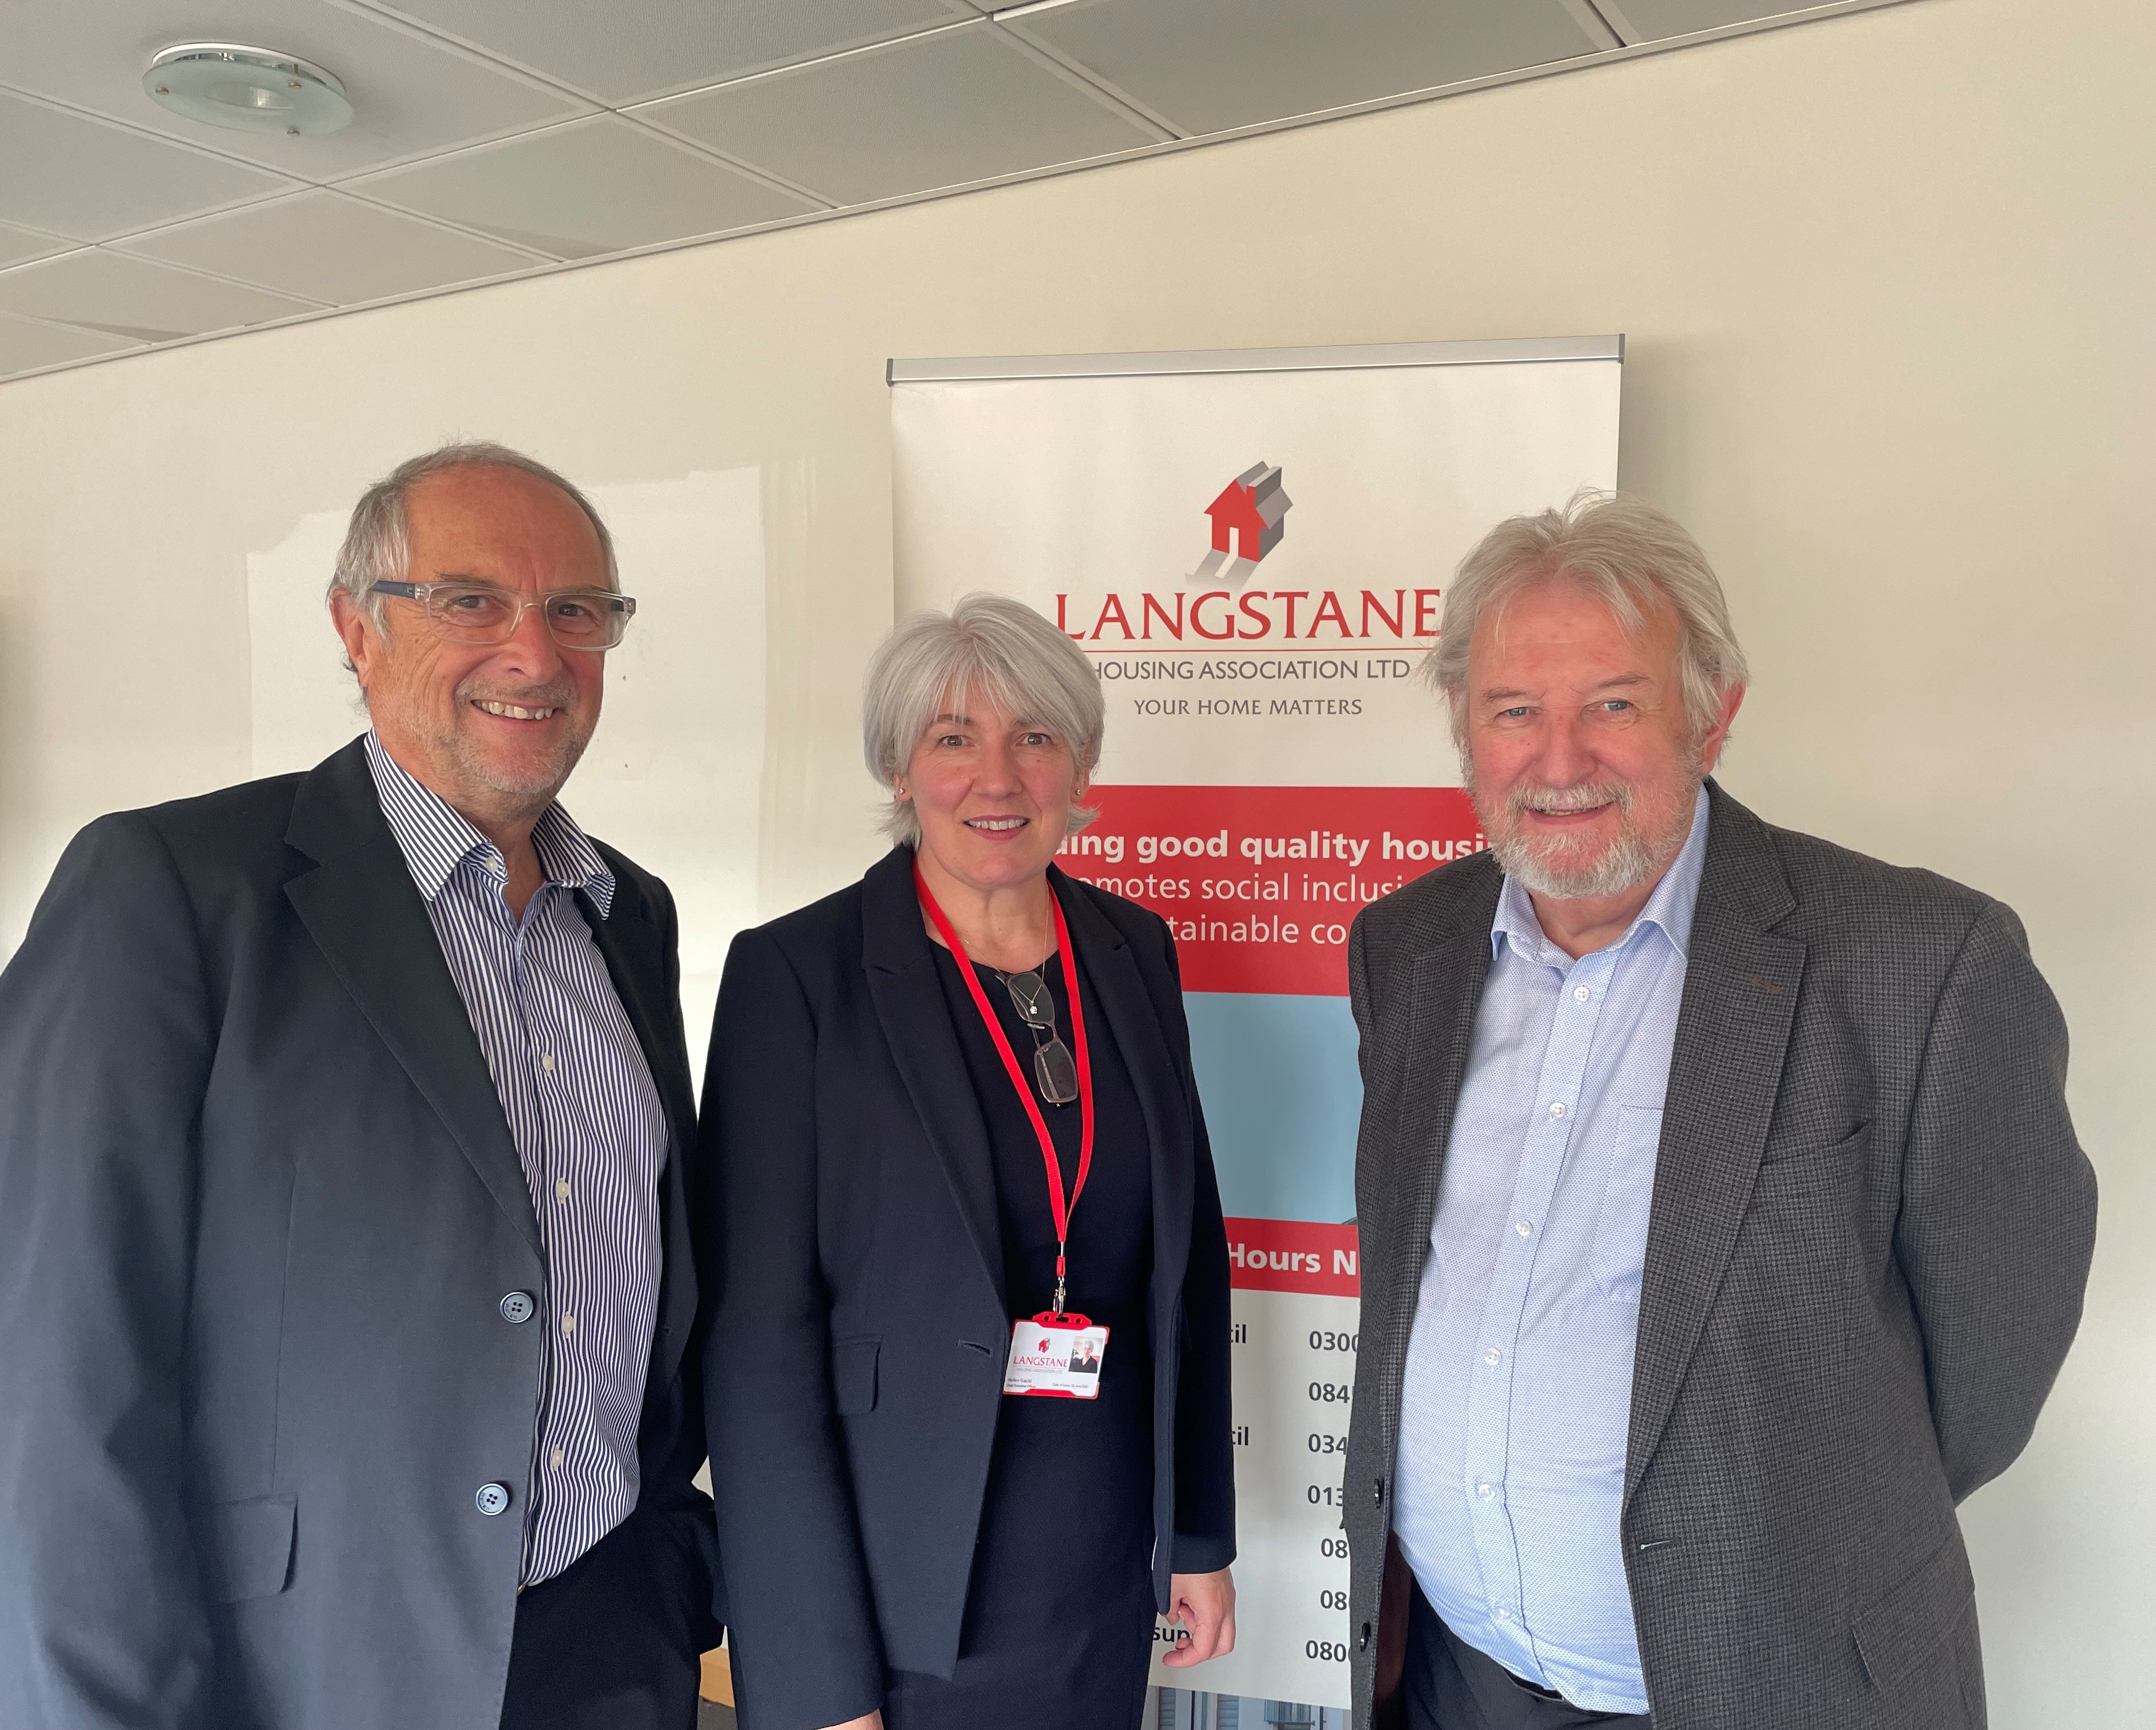 Mike Martin named new chairperson at Langstane